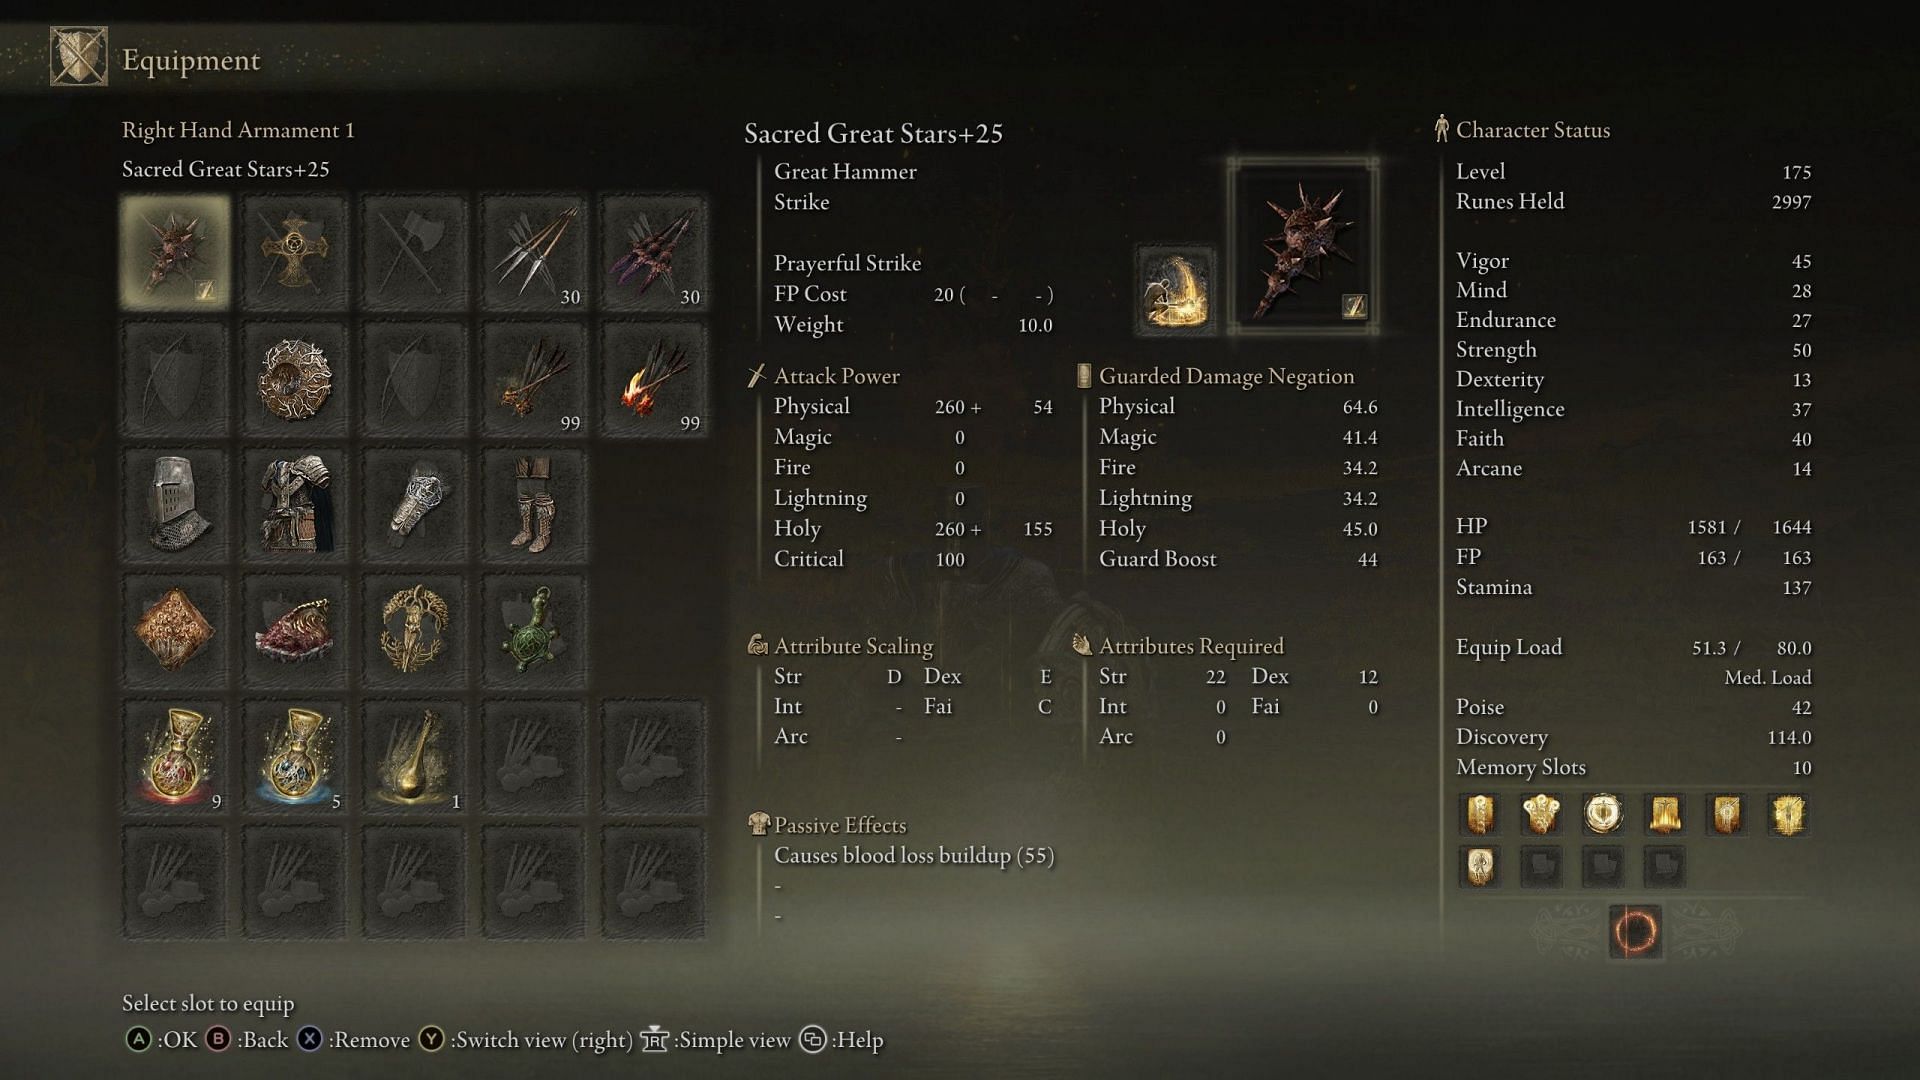 Character Sheet - The Faith Berserker (Image by FromSoftware)